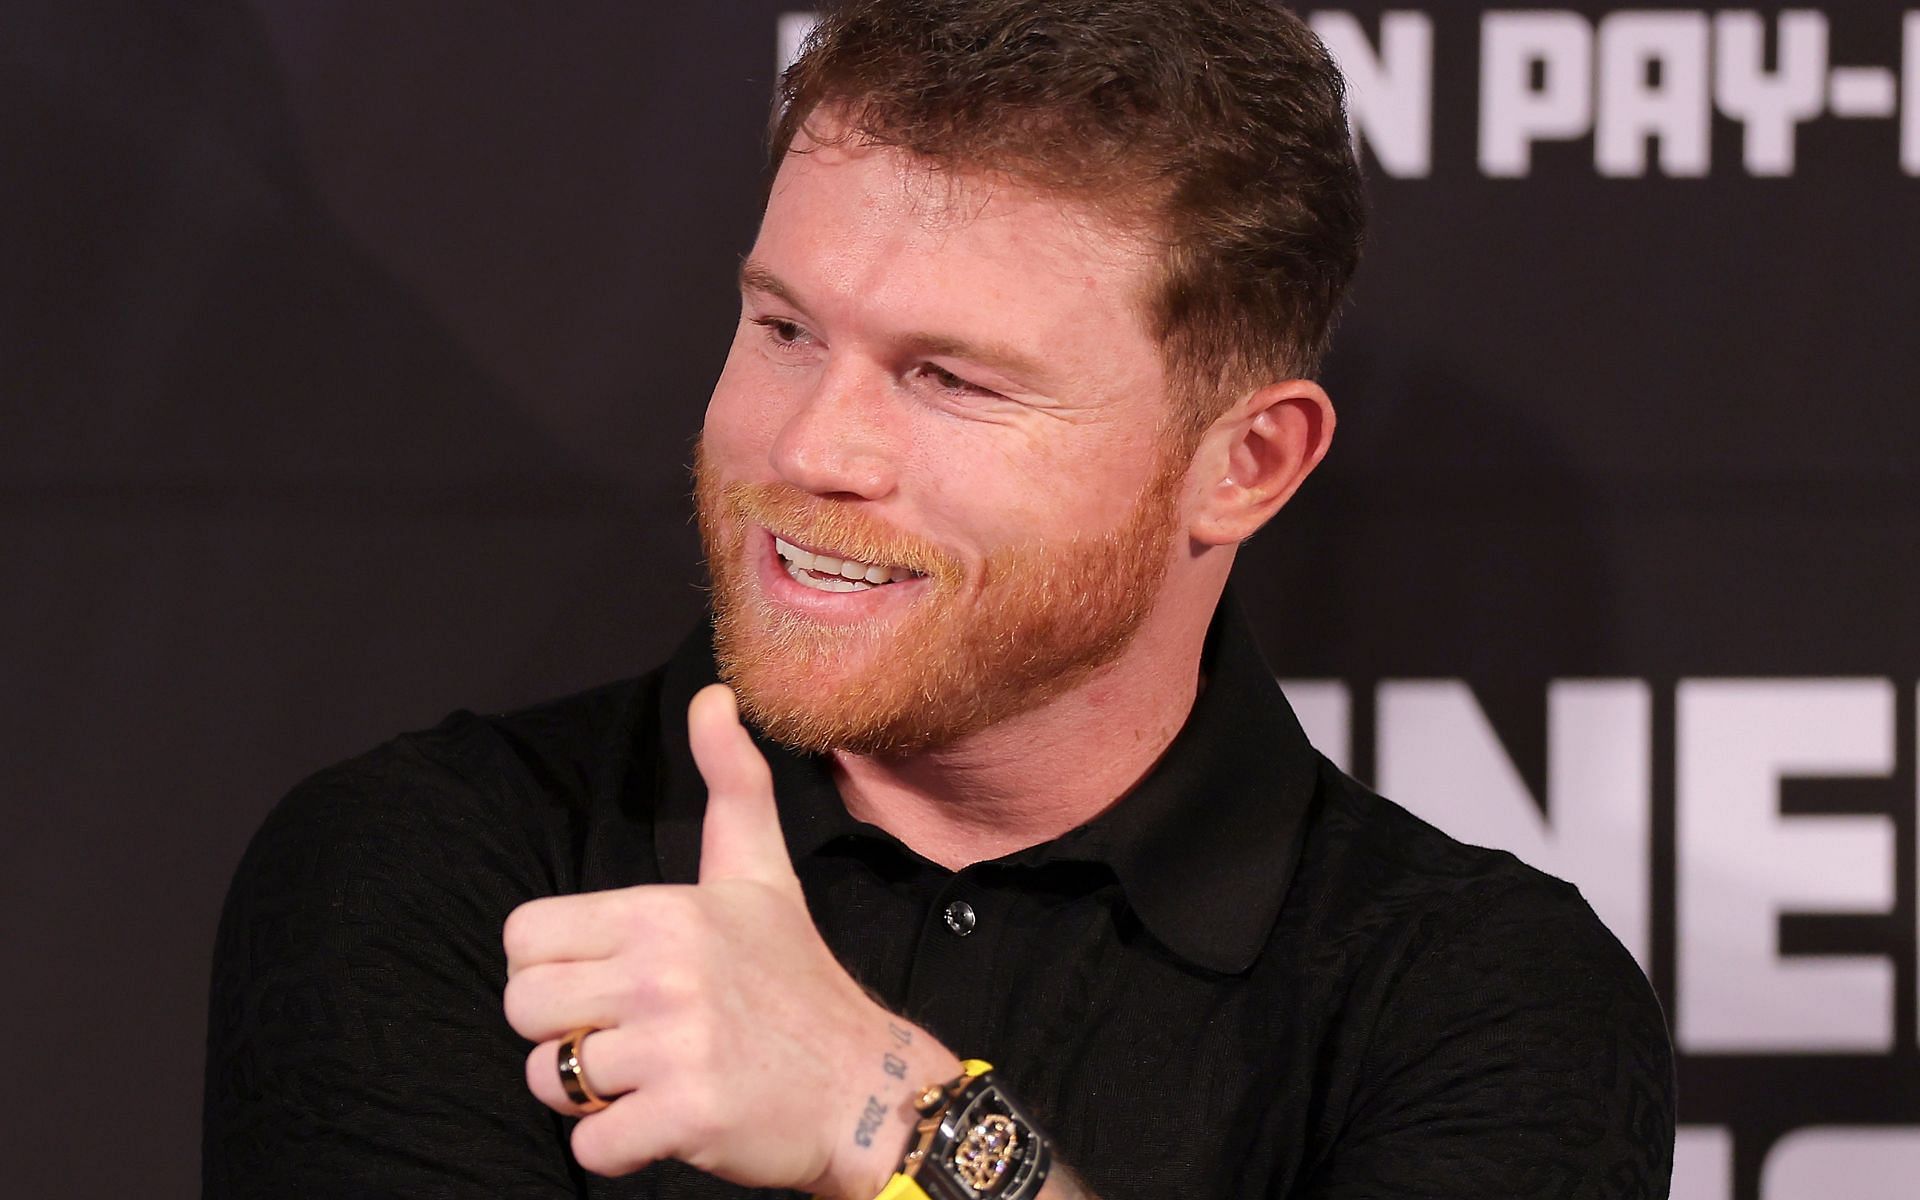 Canelo Alvarez is beheld as one of the biggest box office draws not only in boxing but in all of combat sports [Image courtesy: Getty Images]